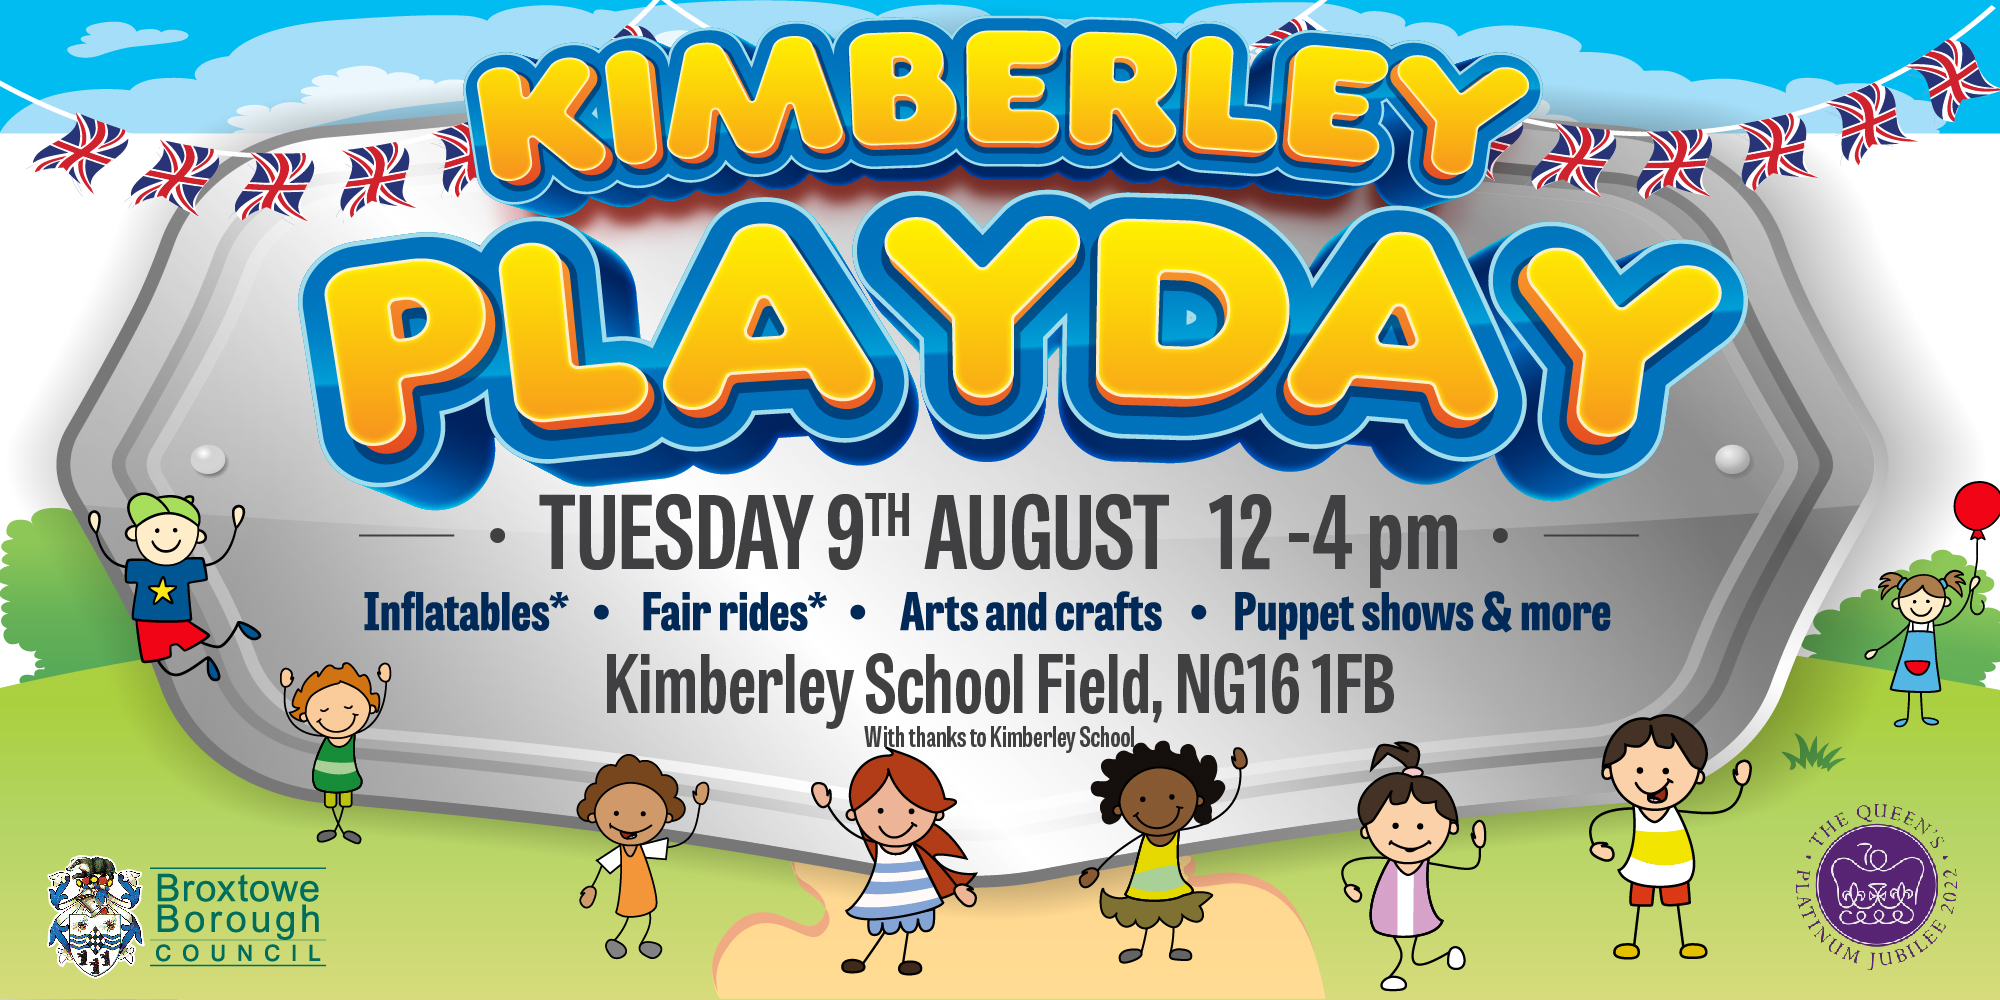 Kimberley Play Day  event.